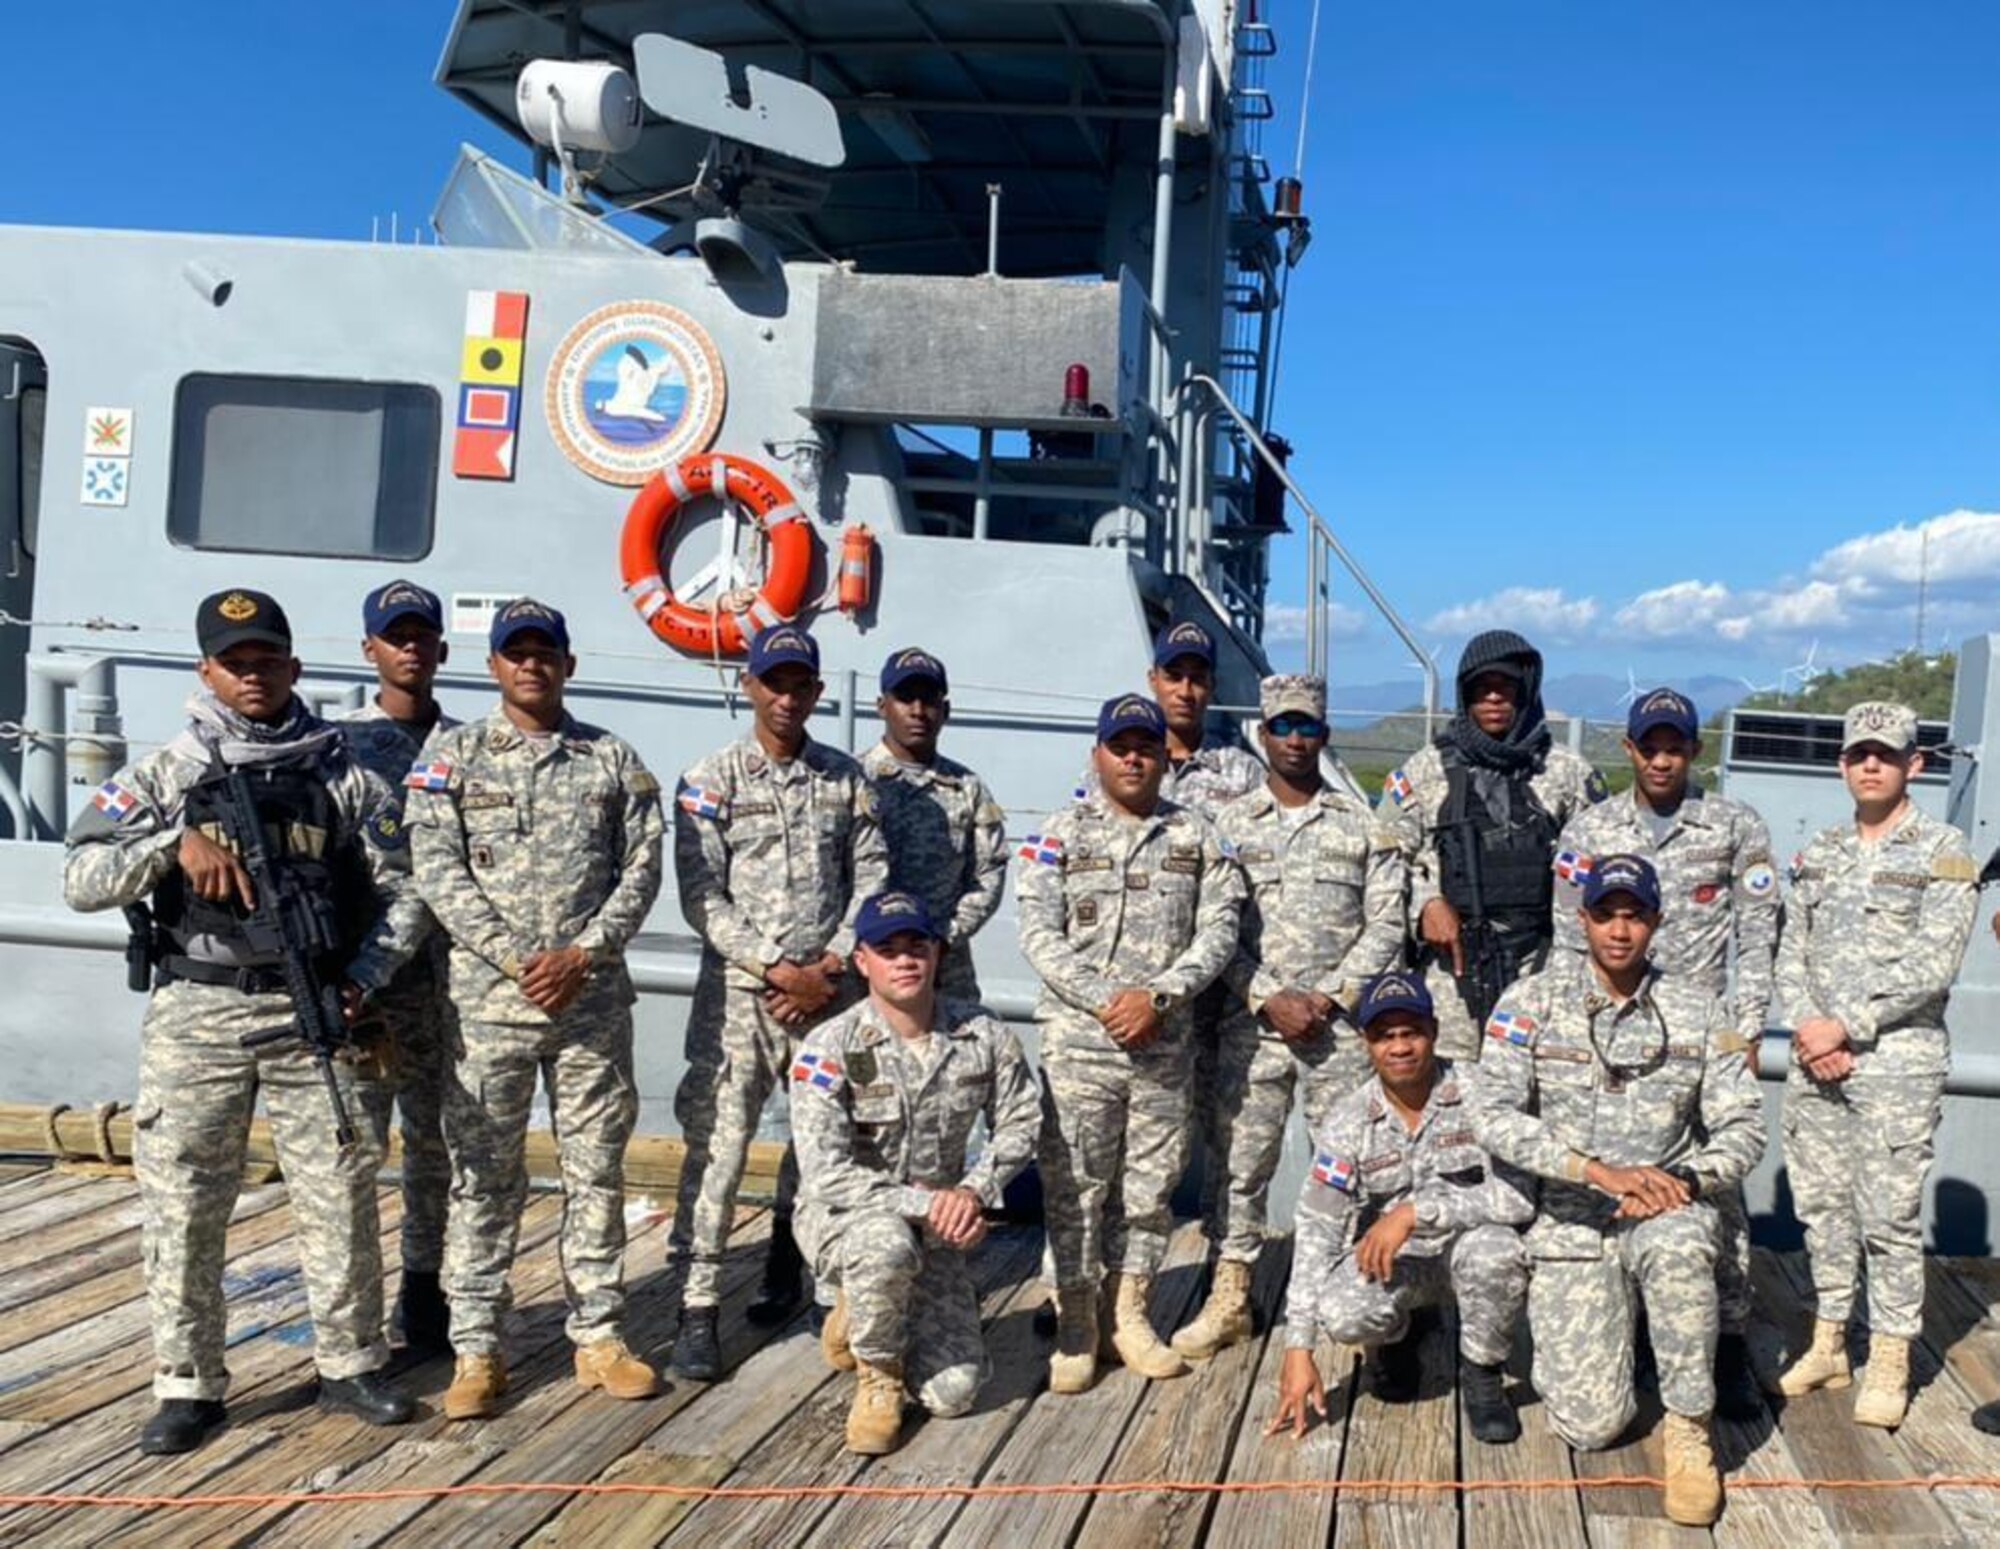 A Dominican Republic Navy ship's crew poses for a group photo while operating in the Caribbean Sea off the southern coast of the Dominican Republic, Feb. 21, 2023. This ship and its crew were taking part in air and maritime integration with U.S. Air Force's 23rd Air Expeditionary Wing during Operation Forward Tiger to improve interoperability and expertise for both forces. (Dominican Republic Navy courtesy photo)